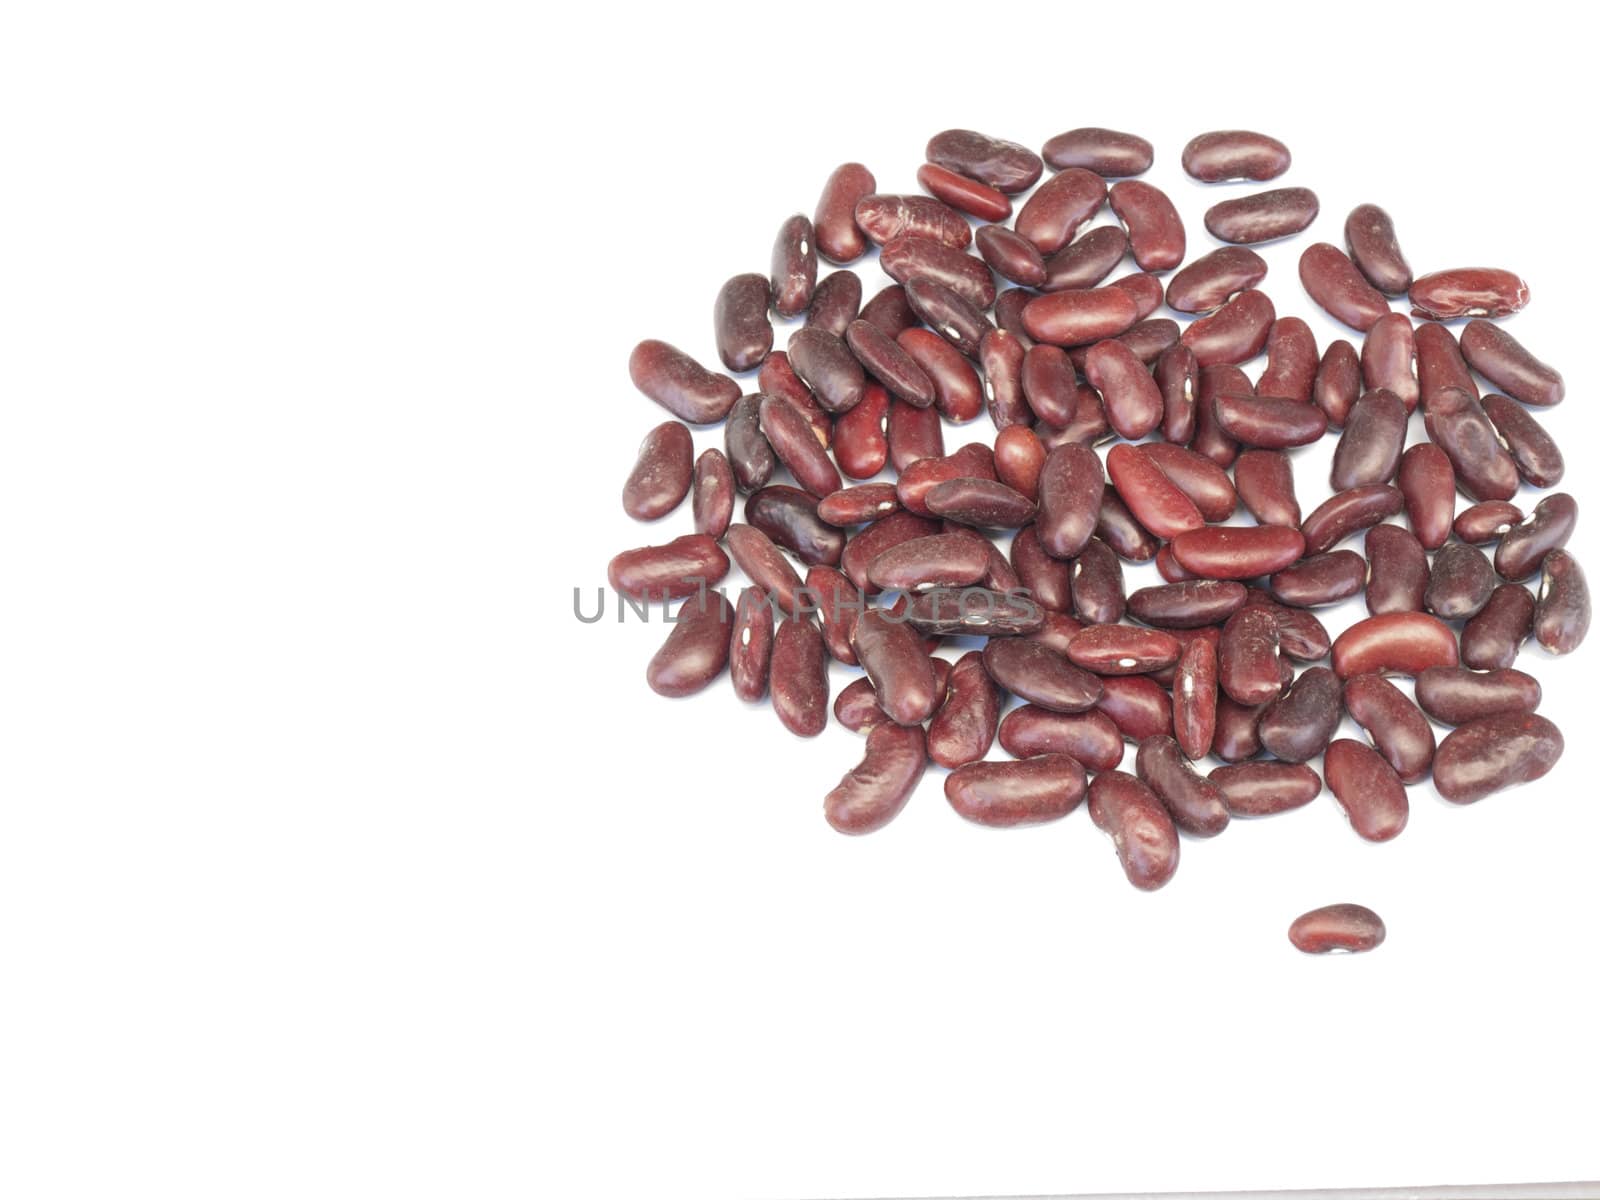 Heap of dried kidney beans or red beans isolated on white backgr by gururugu